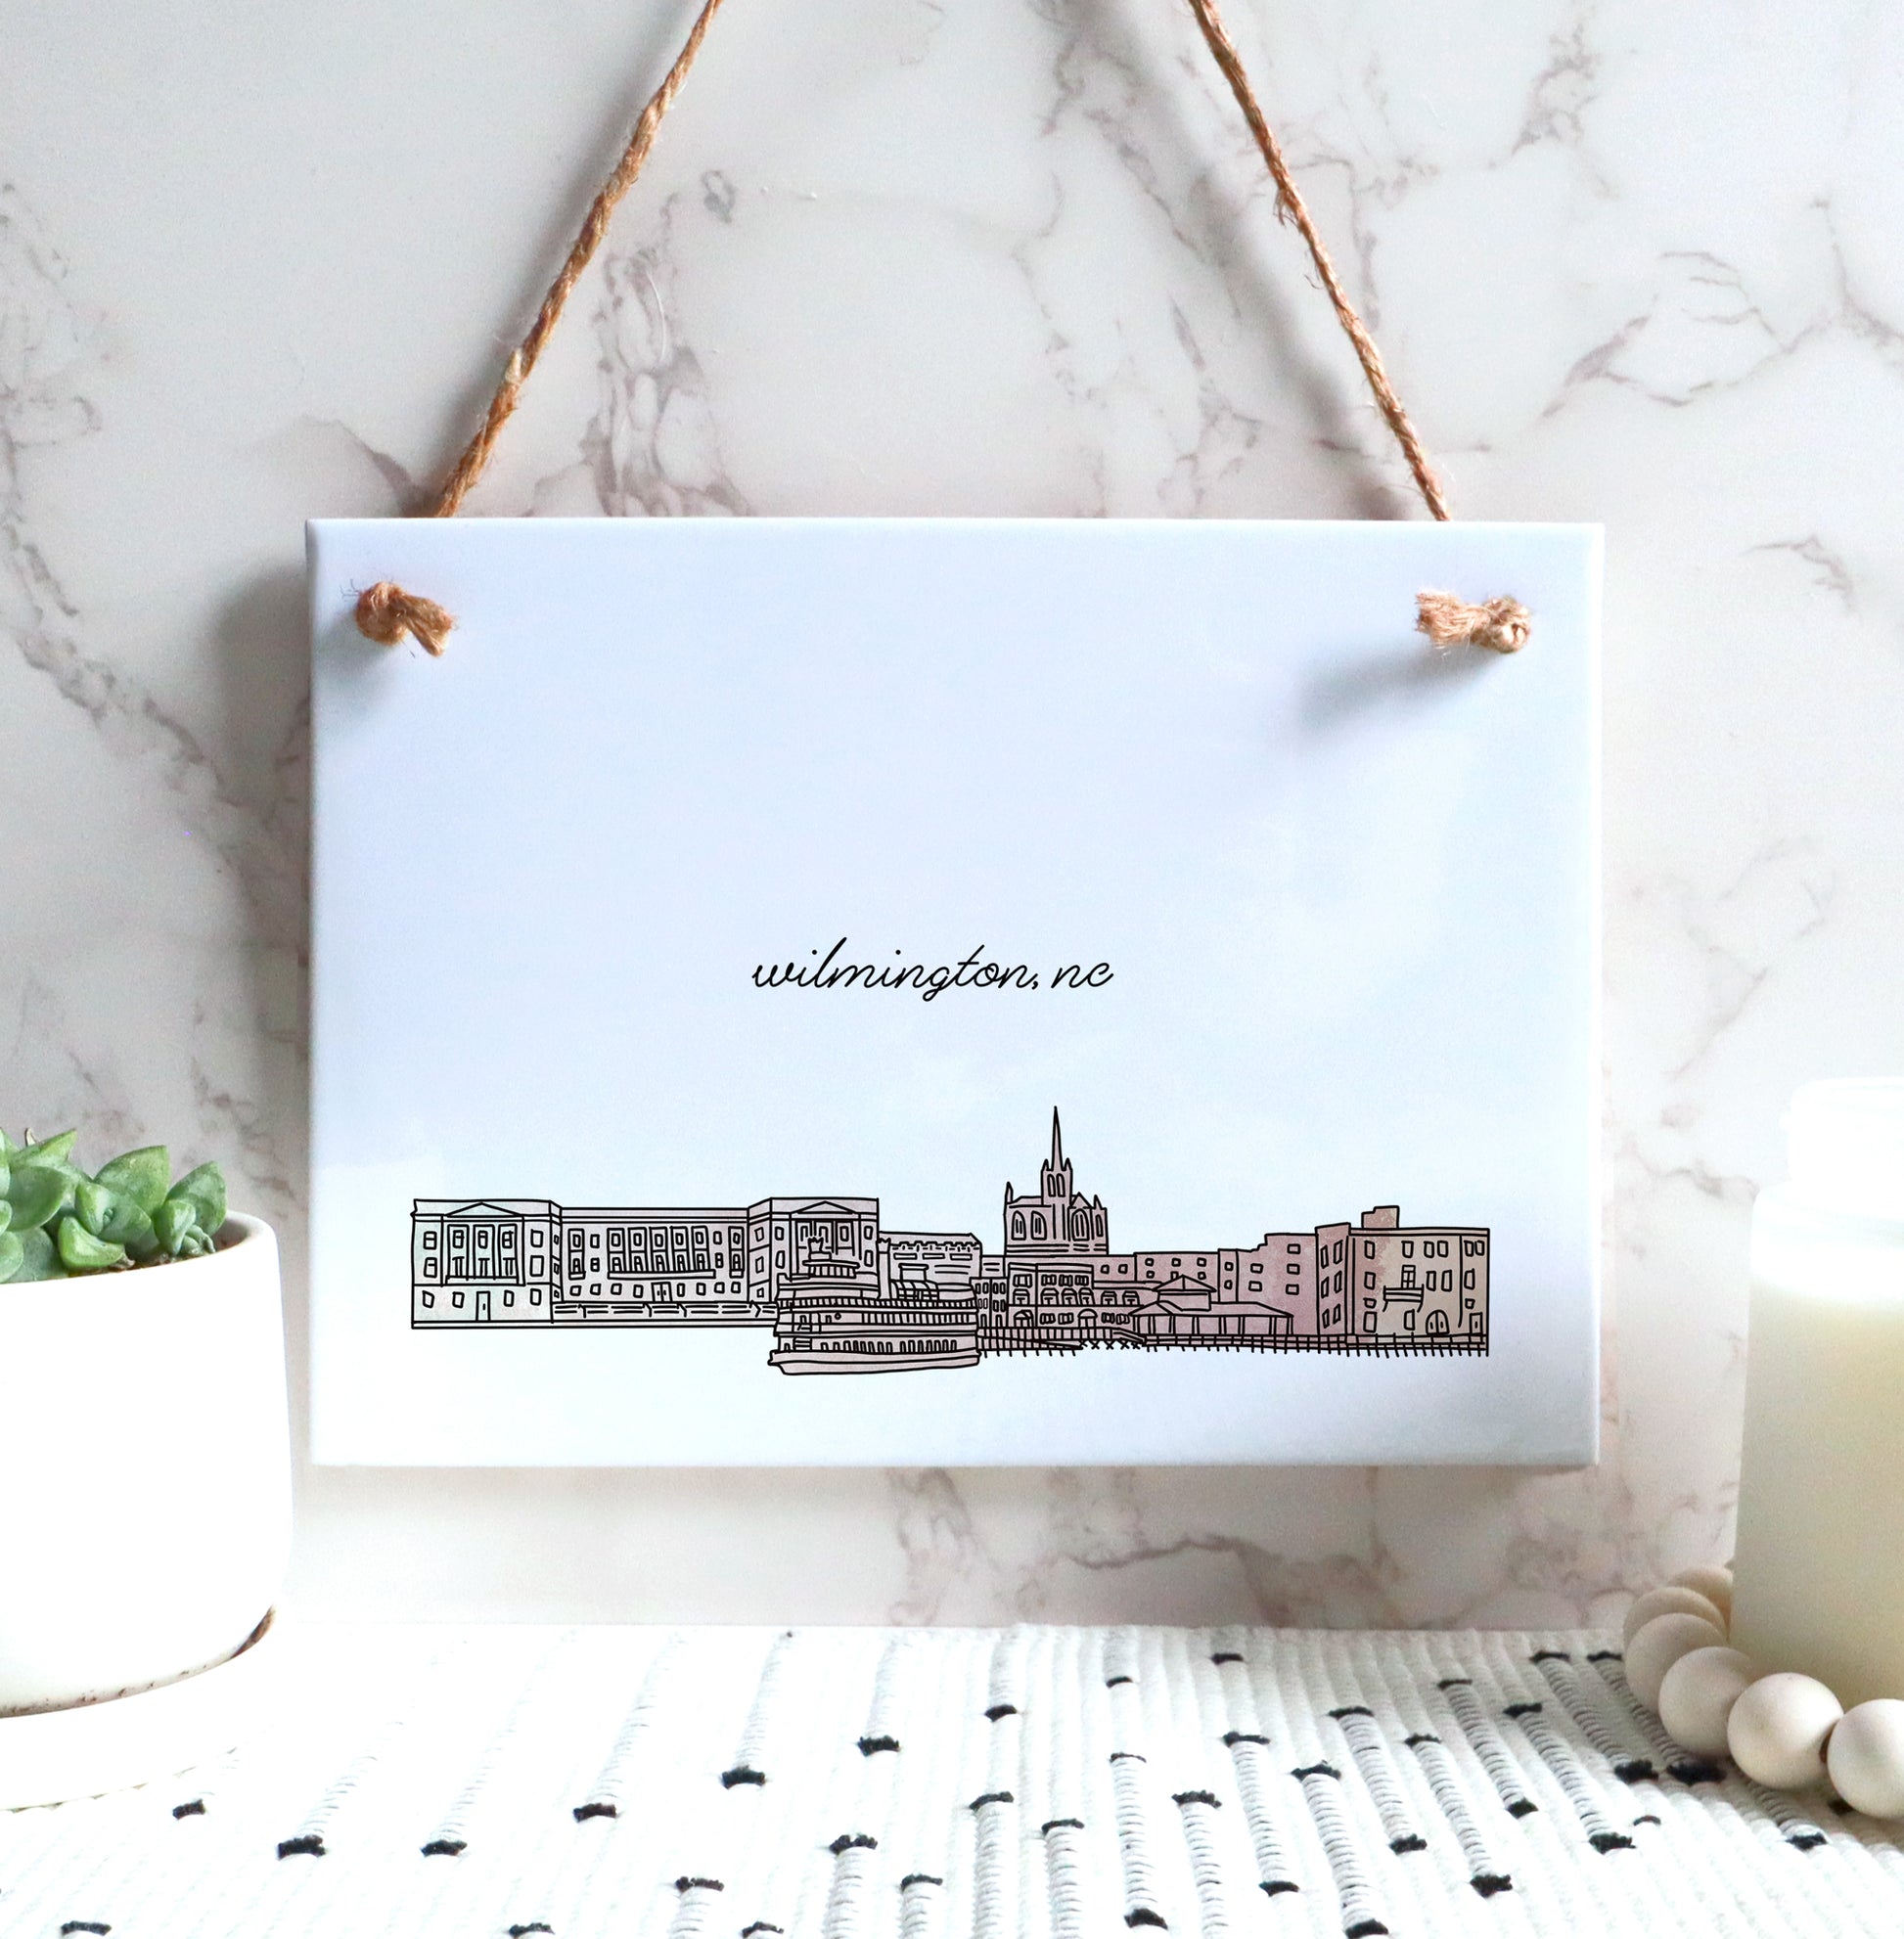 A Wilmington NC souvenir of a drawing of the city skyline on a rectangle tile sign, hanging on a wall - in the color blush